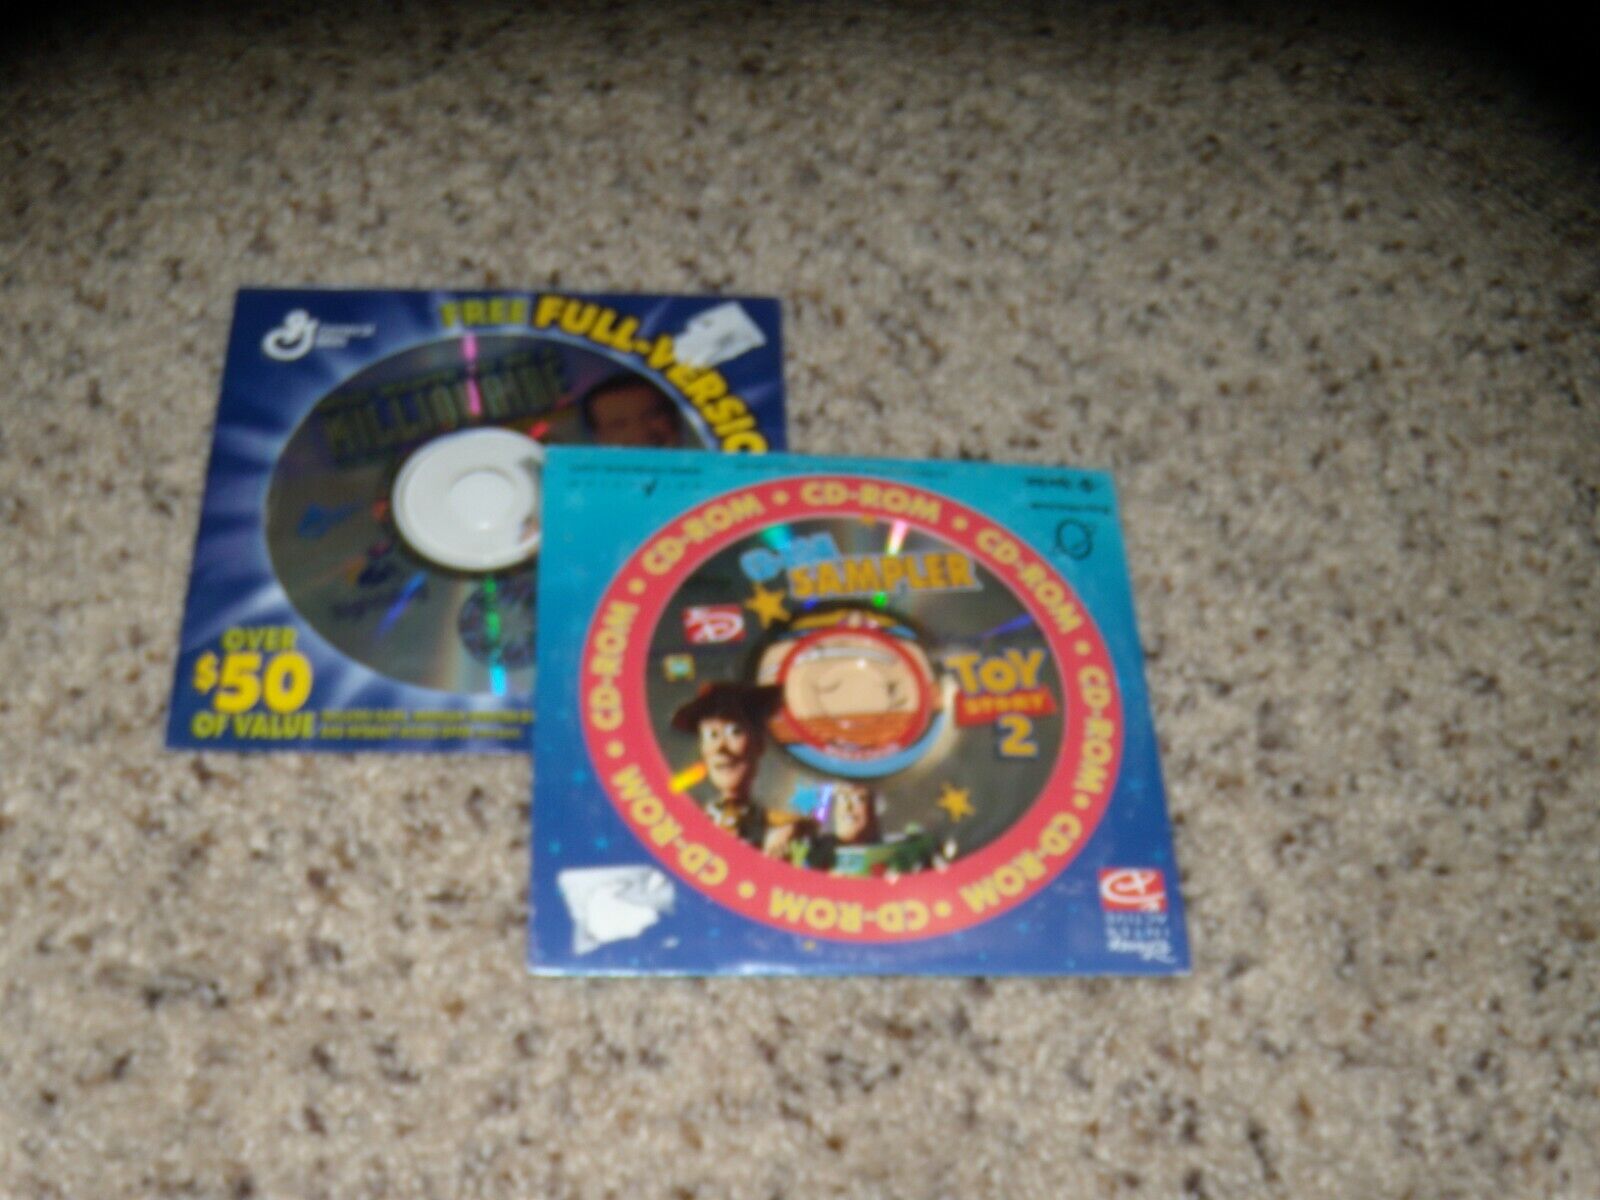 2 PC Games: Toy Story 2 CD-ROM Sampler and Who wants to be a Millionaire